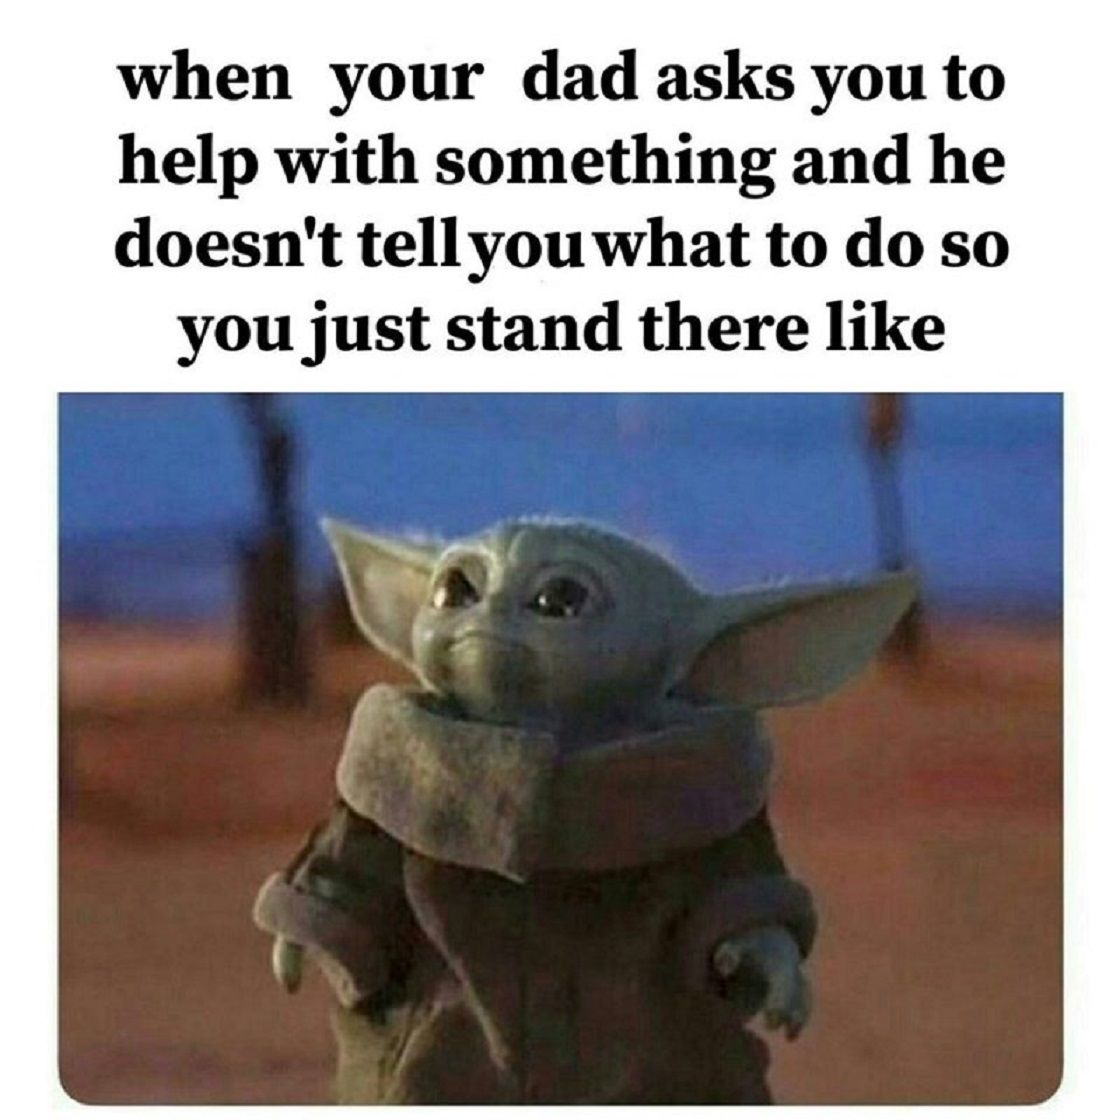 15 Funniest Baby Yoda Looking Up Memes RELATED 10 Shows That Have Created The Most Memes